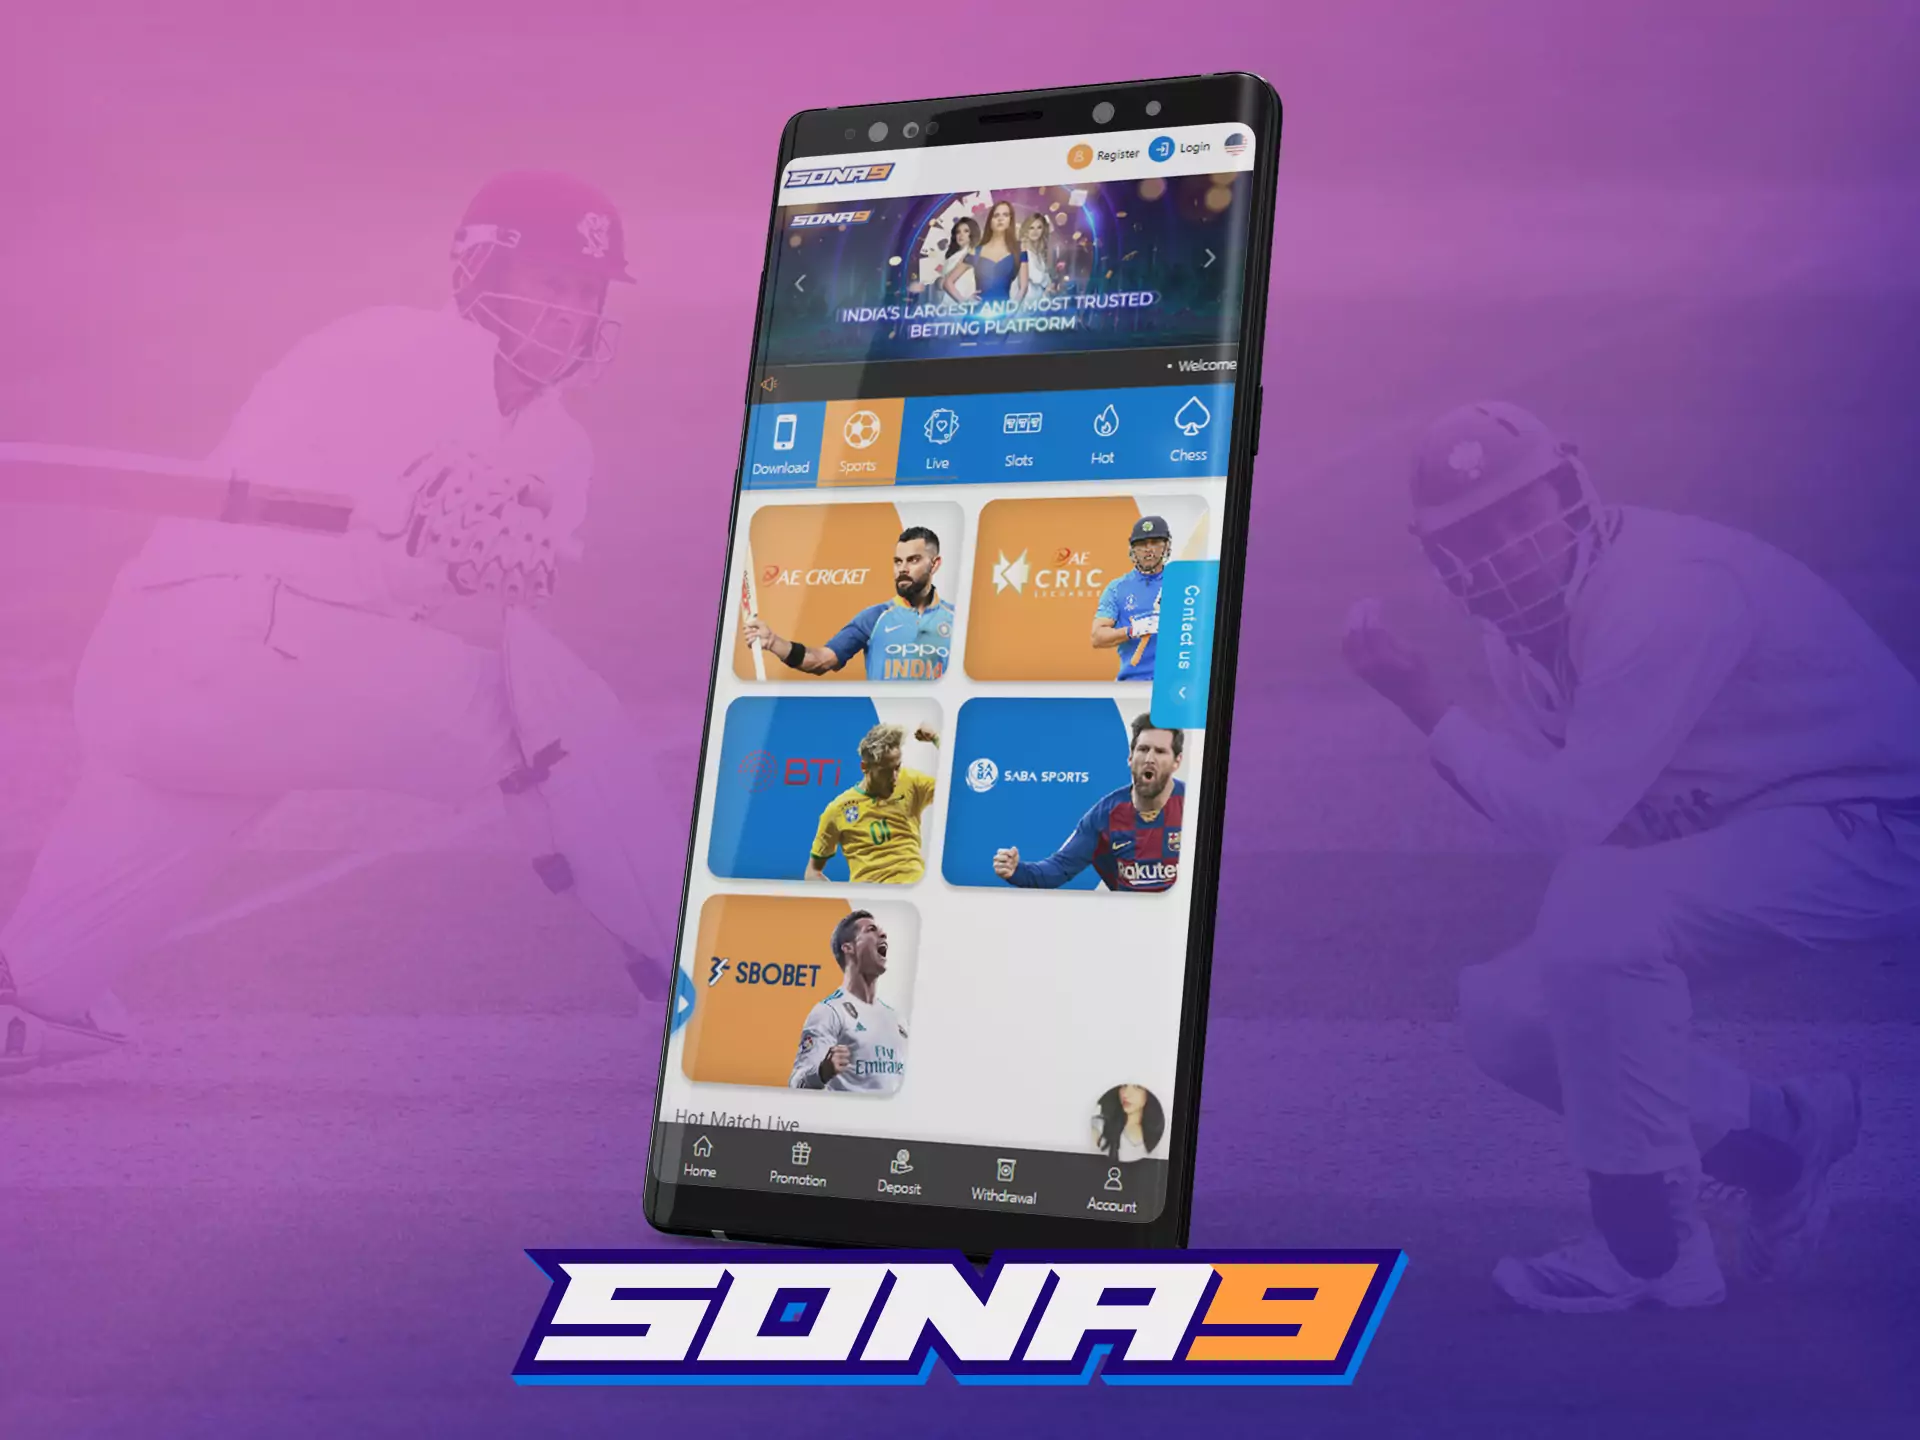 For betting from a smartphone, use the mobile website of Sona9.